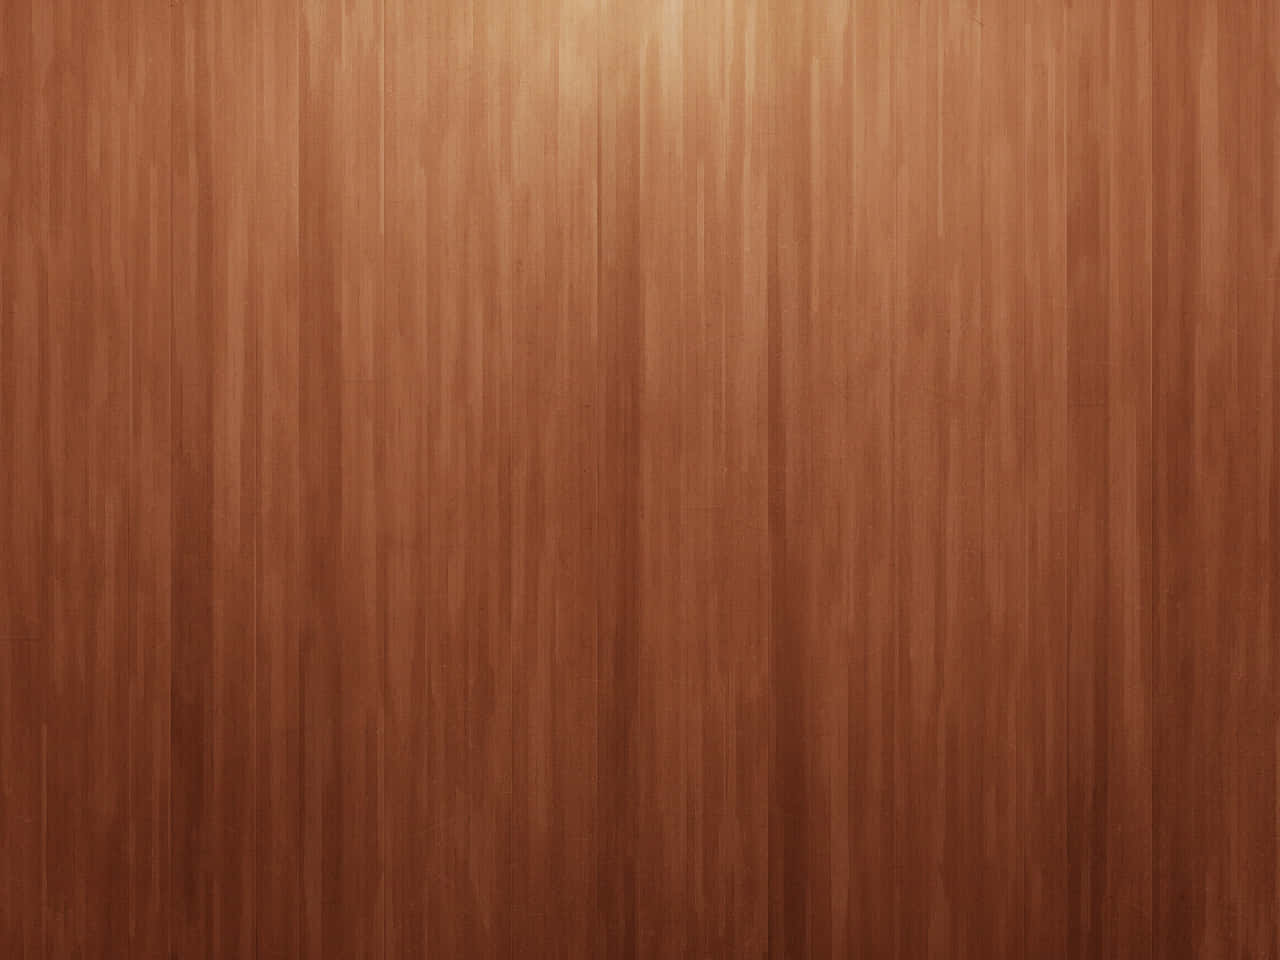 A Stylish Wood Background with High Resolution Detail